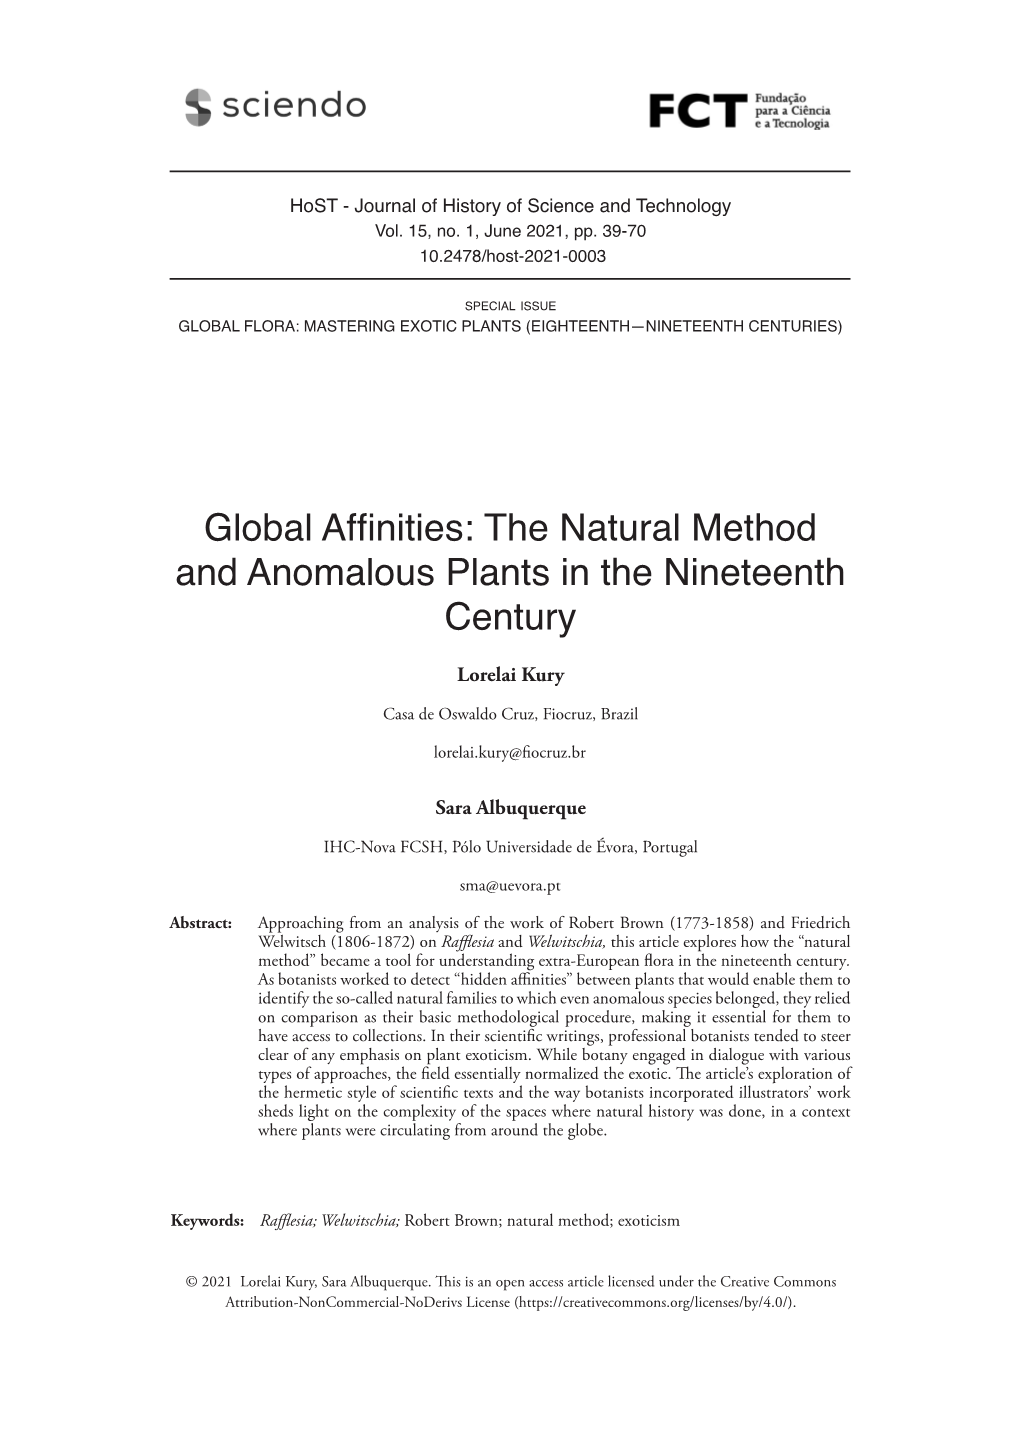 Global Affinities: the Natural Method and Anomalous Plants in the Nineteenth Century Lorelai Kury